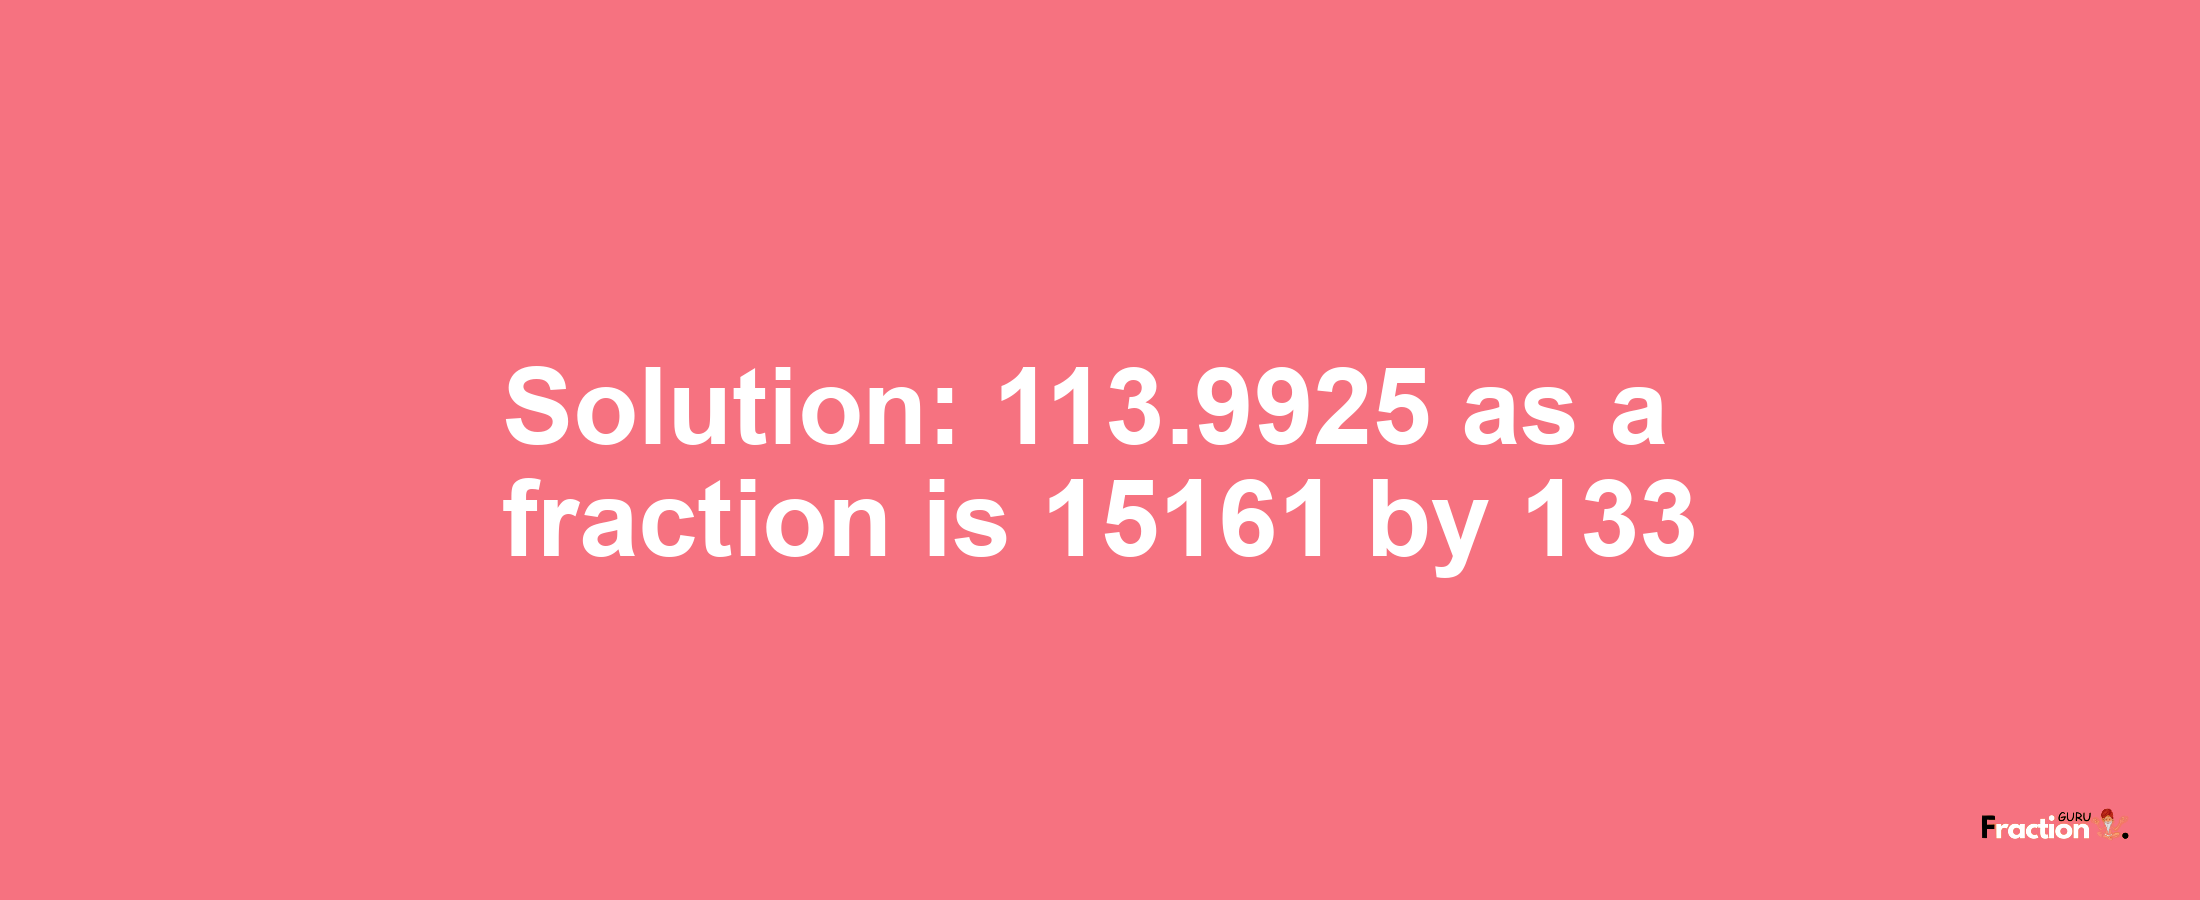 Solution:113.9925 as a fraction is 15161/133